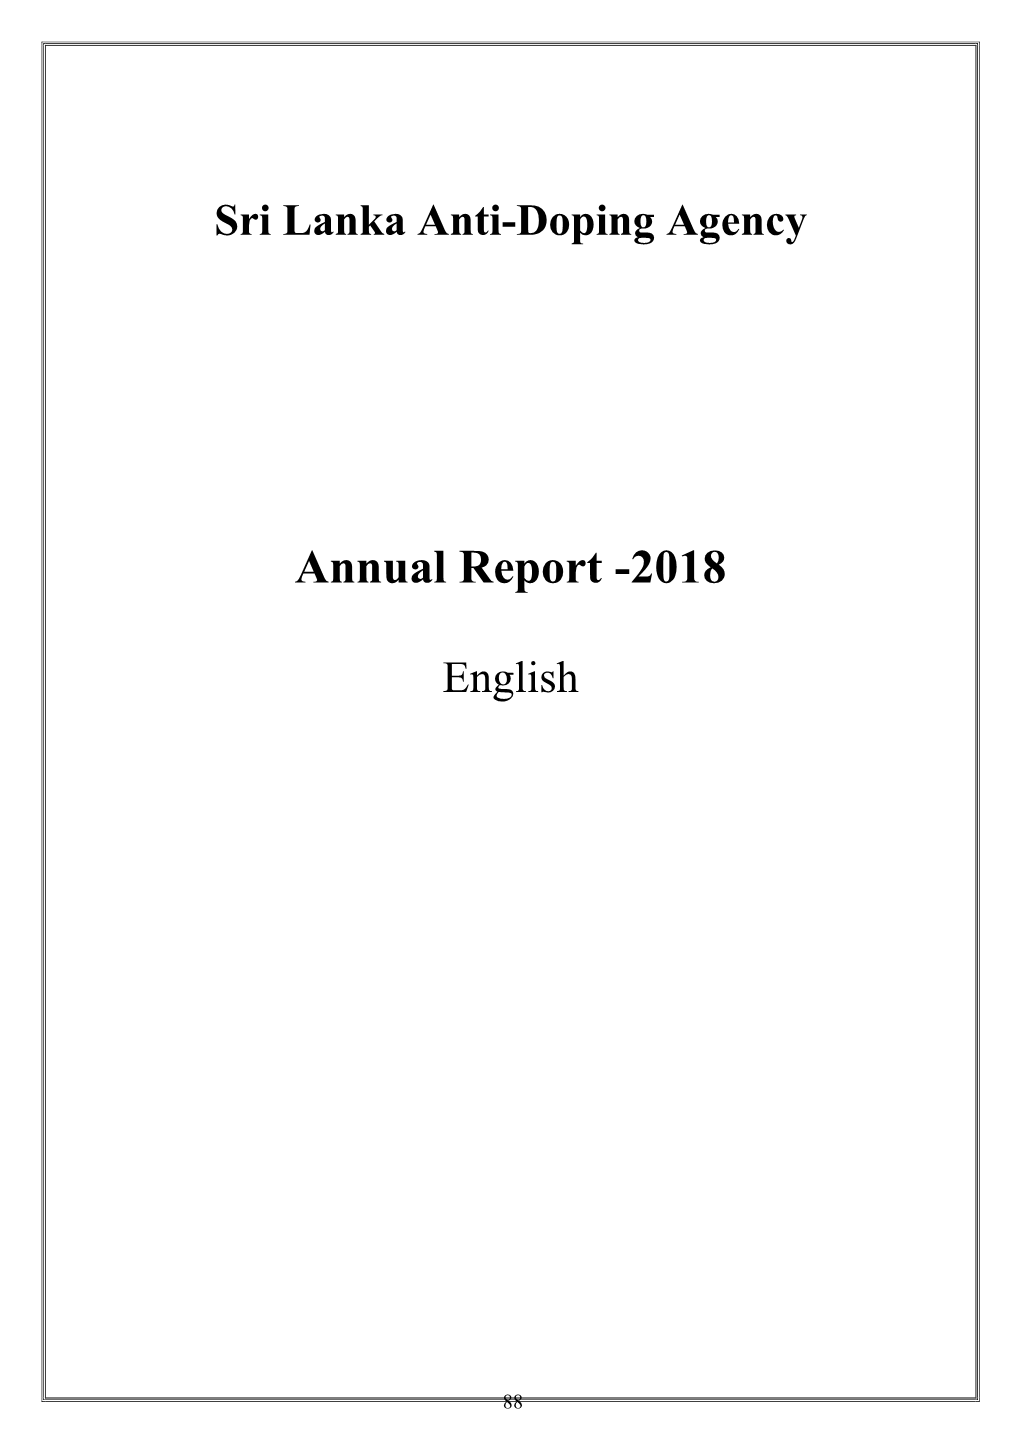 Annual Report of the Sri Lanka Anti-Doping Agency for the Year 2018